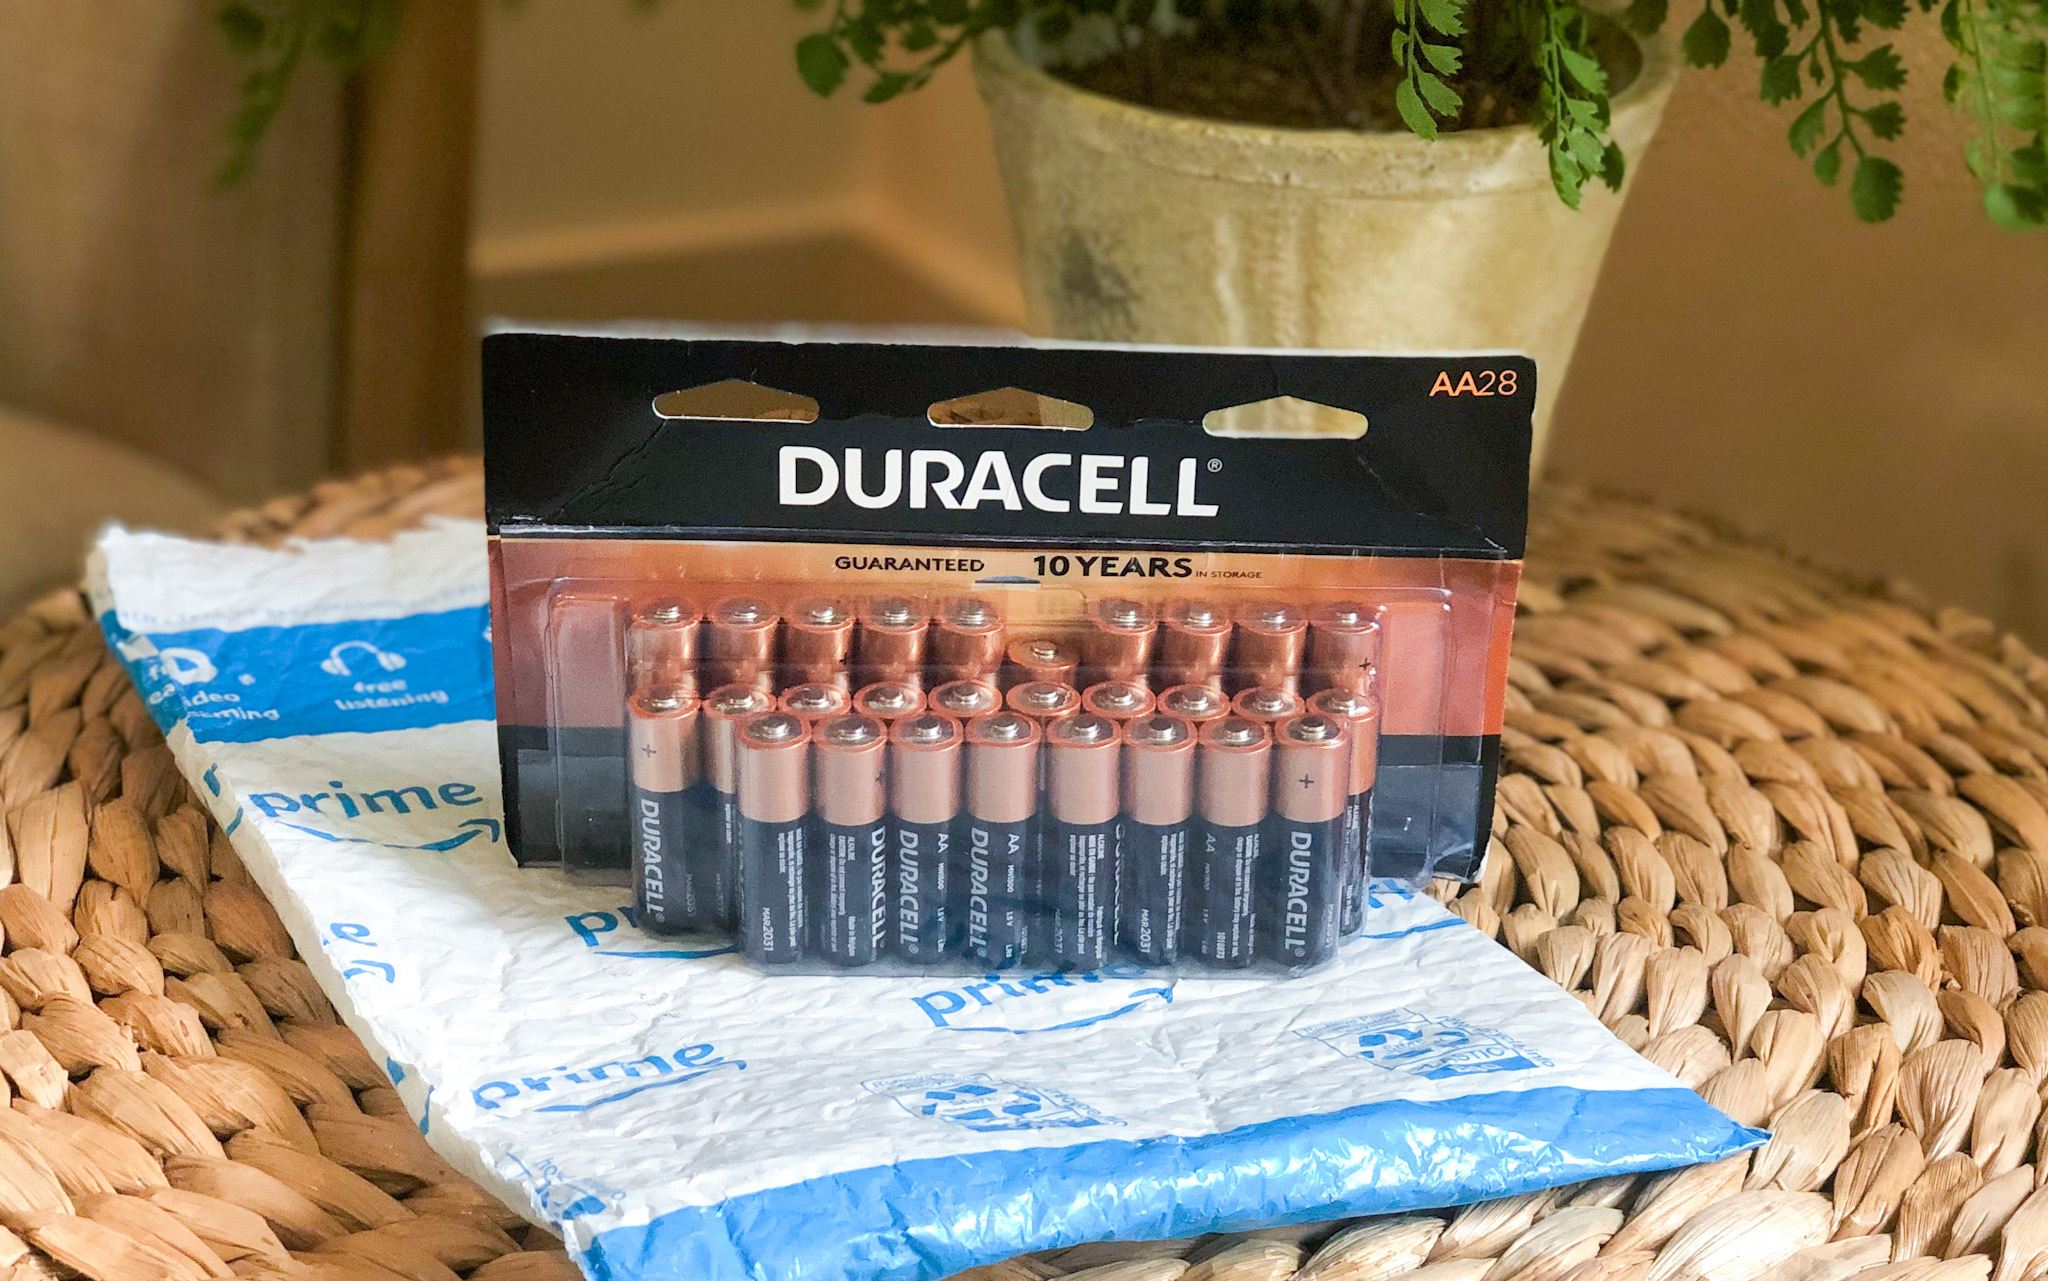 Get Duracell CR2032 Batteries For FREE At Publix - iHeartPublix